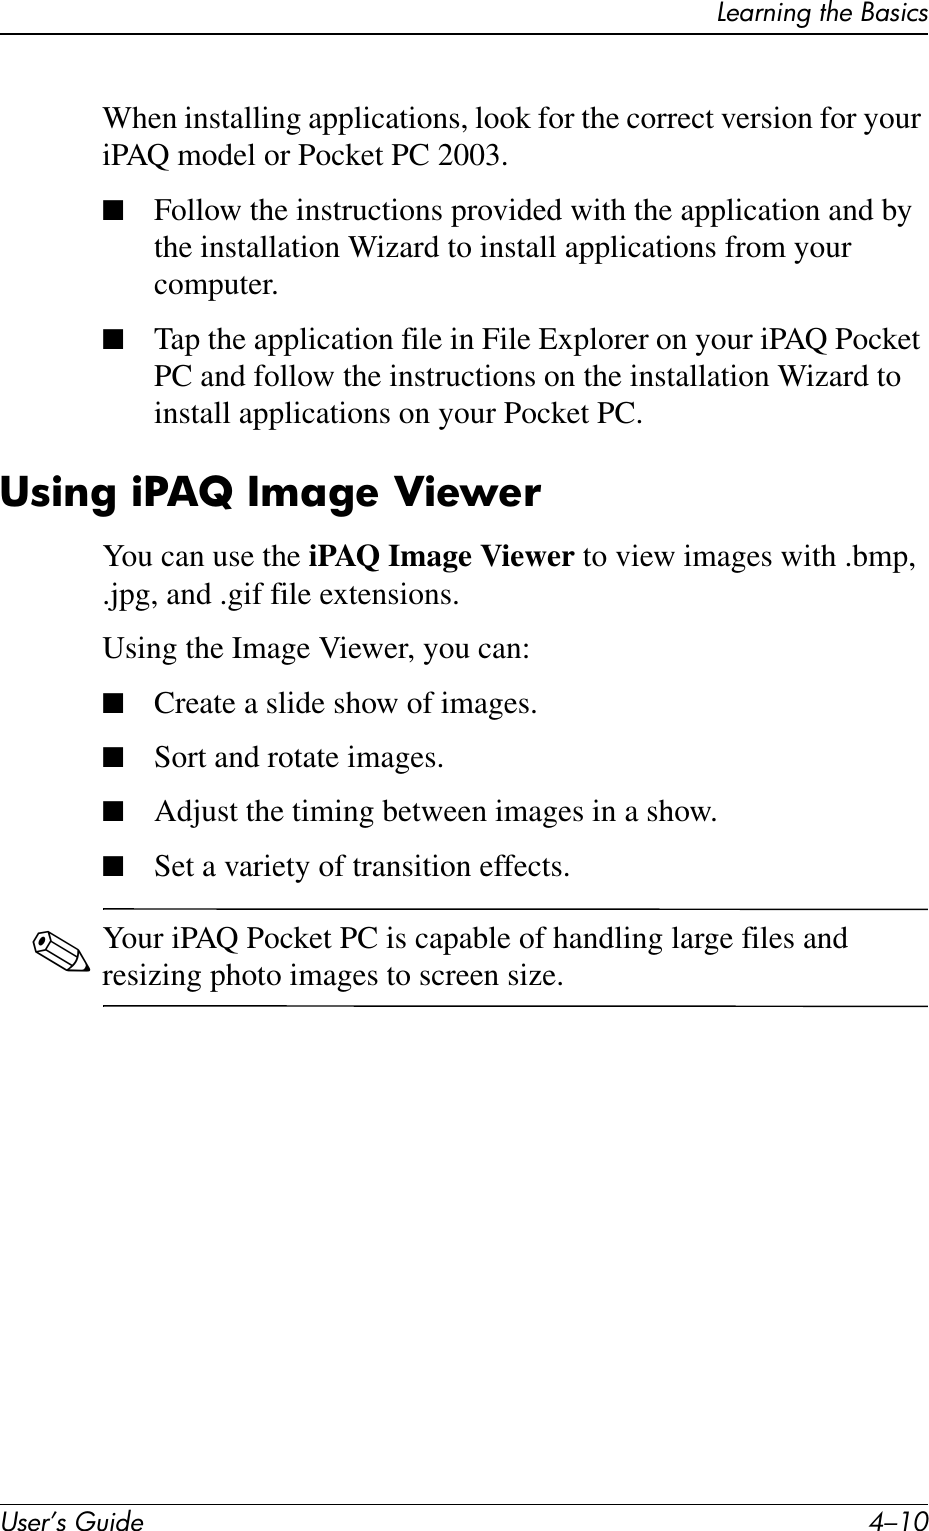 User’s Guide 4–10Learning the BasicsWhen installing applications, look for the correct version for your iPAQ model or Pocket PC 2003.■Follow the instructions provided with the application and by the installation Wizard to install applications from your computer.■Tap the application file in File Explorer on your iPAQ Pocket PC and follow the instructions on the installation Wizard to install applications on your Pocket PC.Using iPAQ Image ViewerYou can use the iPAQ Image Viewer to view images with .bmp, .jpg, and .gif file extensions.Using the Image Viewer, you can:■Create a slide show of images.■Sort and rotate images.■Adjust the timing between images in a show.■Set a variety of transition effects.✎Your iPAQ Pocket PC is capable of handling large files and resizing photo images to screen size.